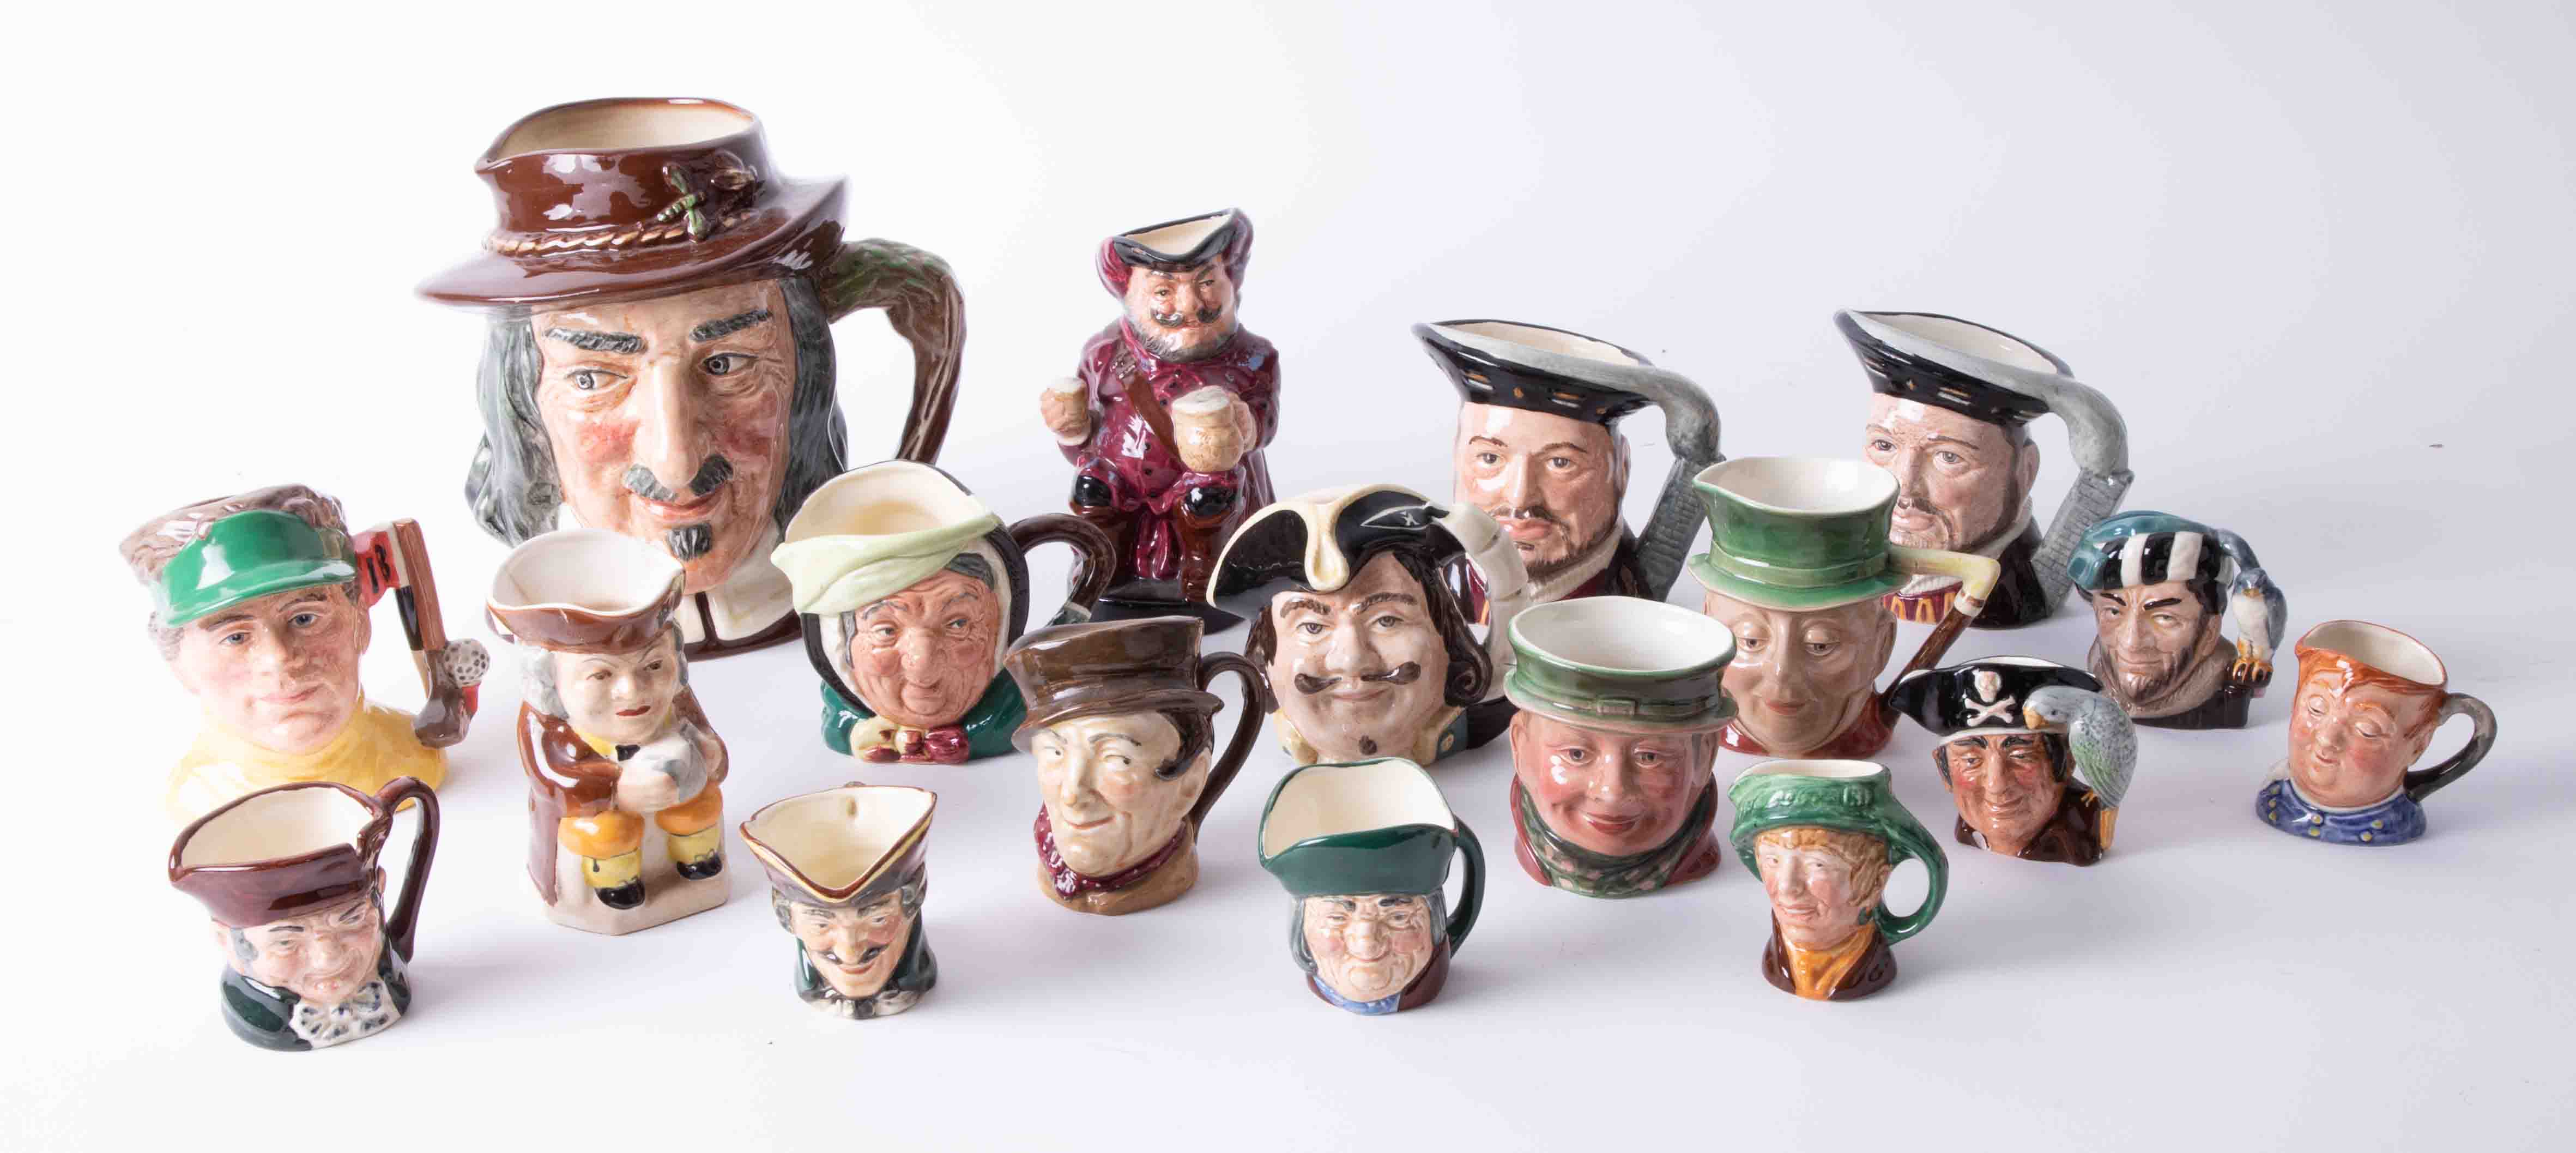 A collection of Royal Doulton small sized character jugs including Sairey Gamp, Fat Boy, The